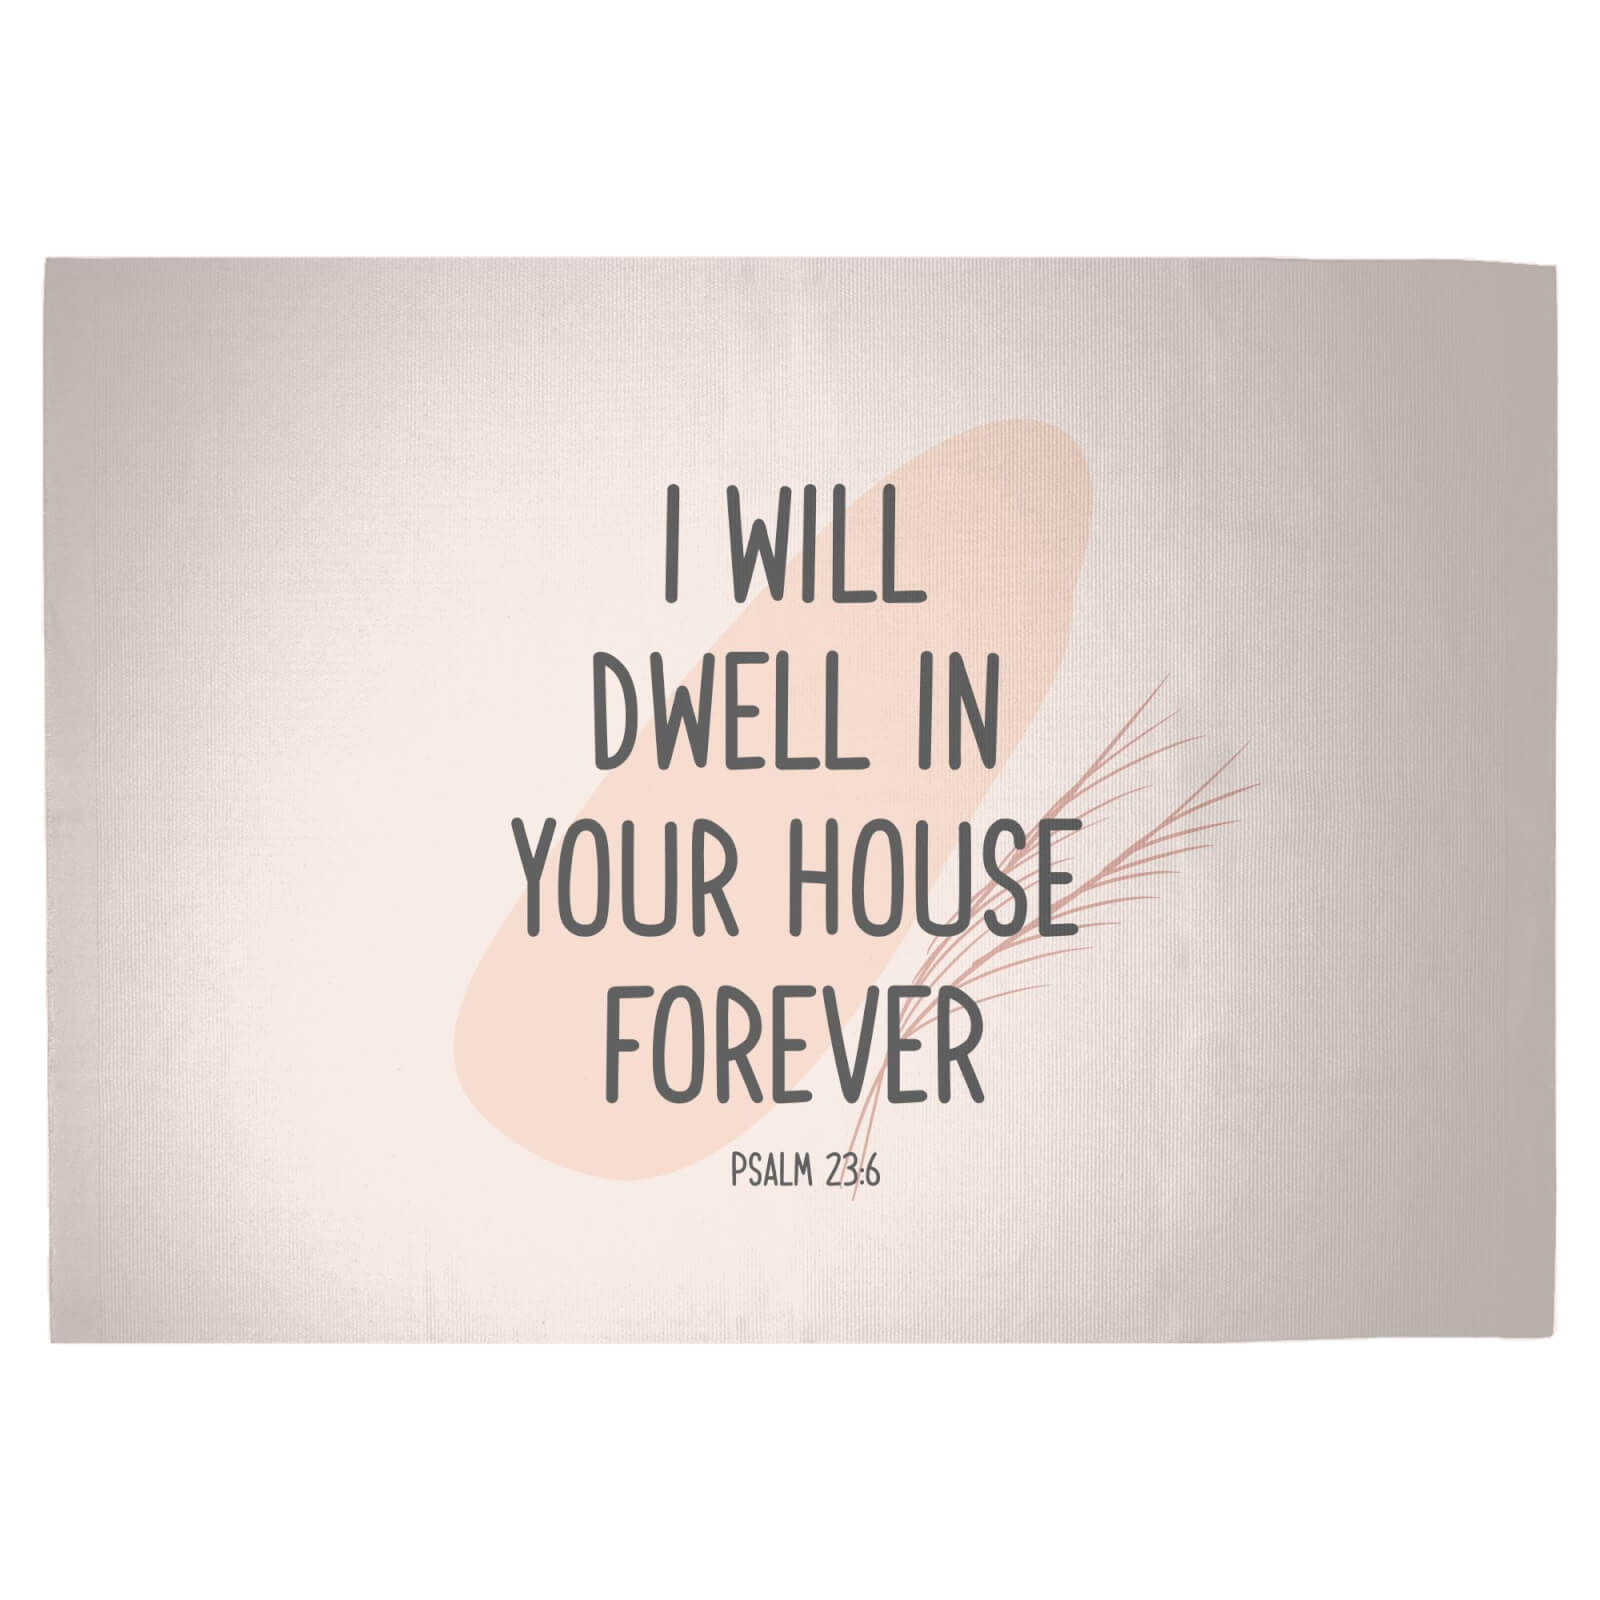 I Will Dwell In Your House Forever Woven Rug - Large